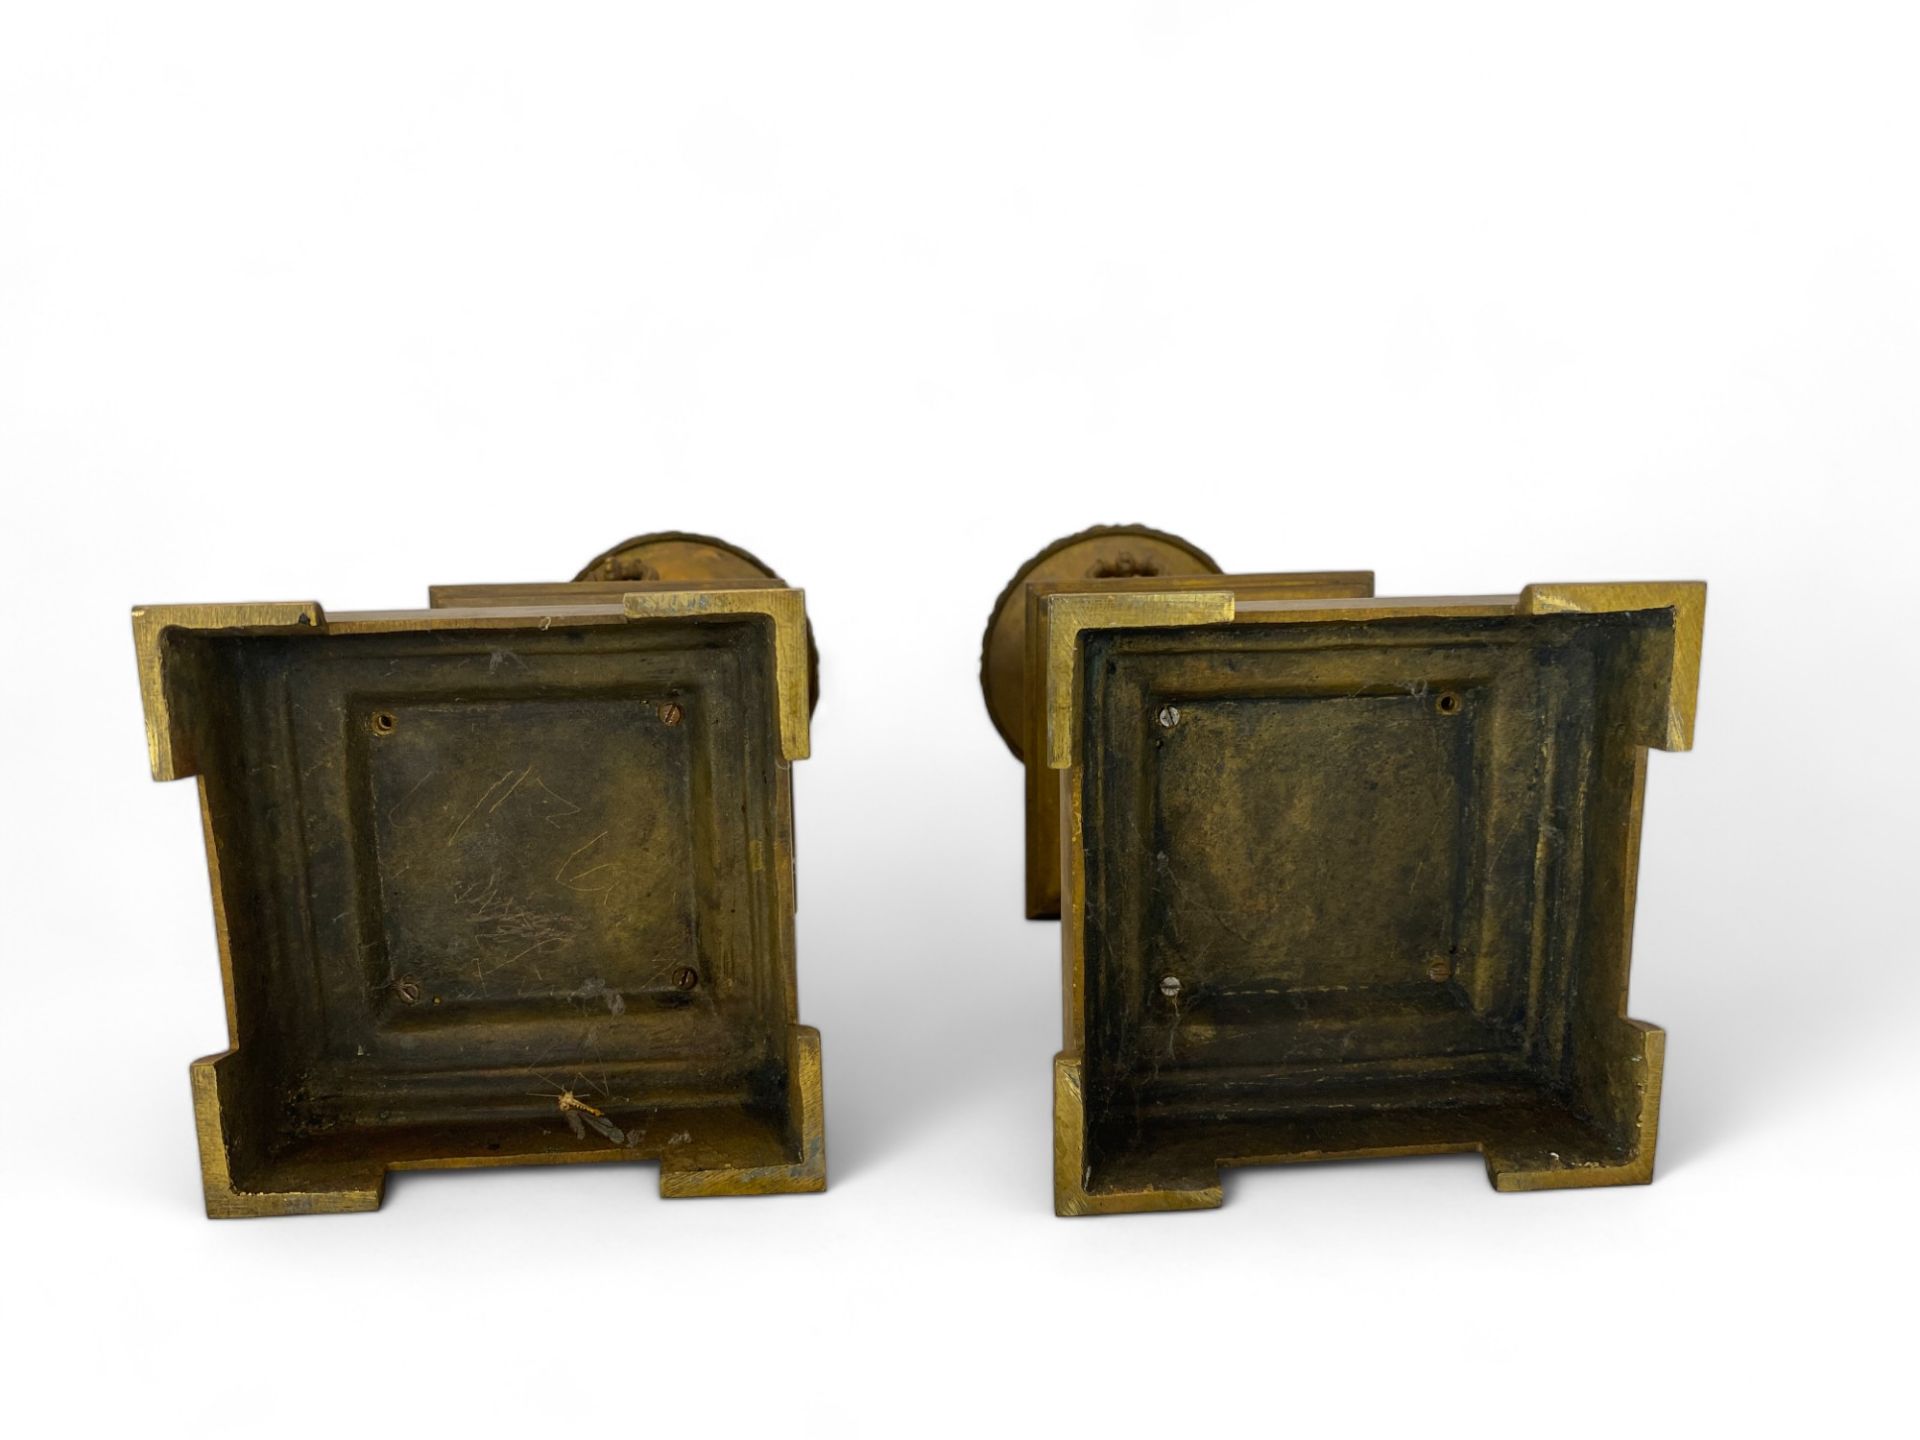 A pair of 19th century gilt bronze chimney ornaments - Image 6 of 12